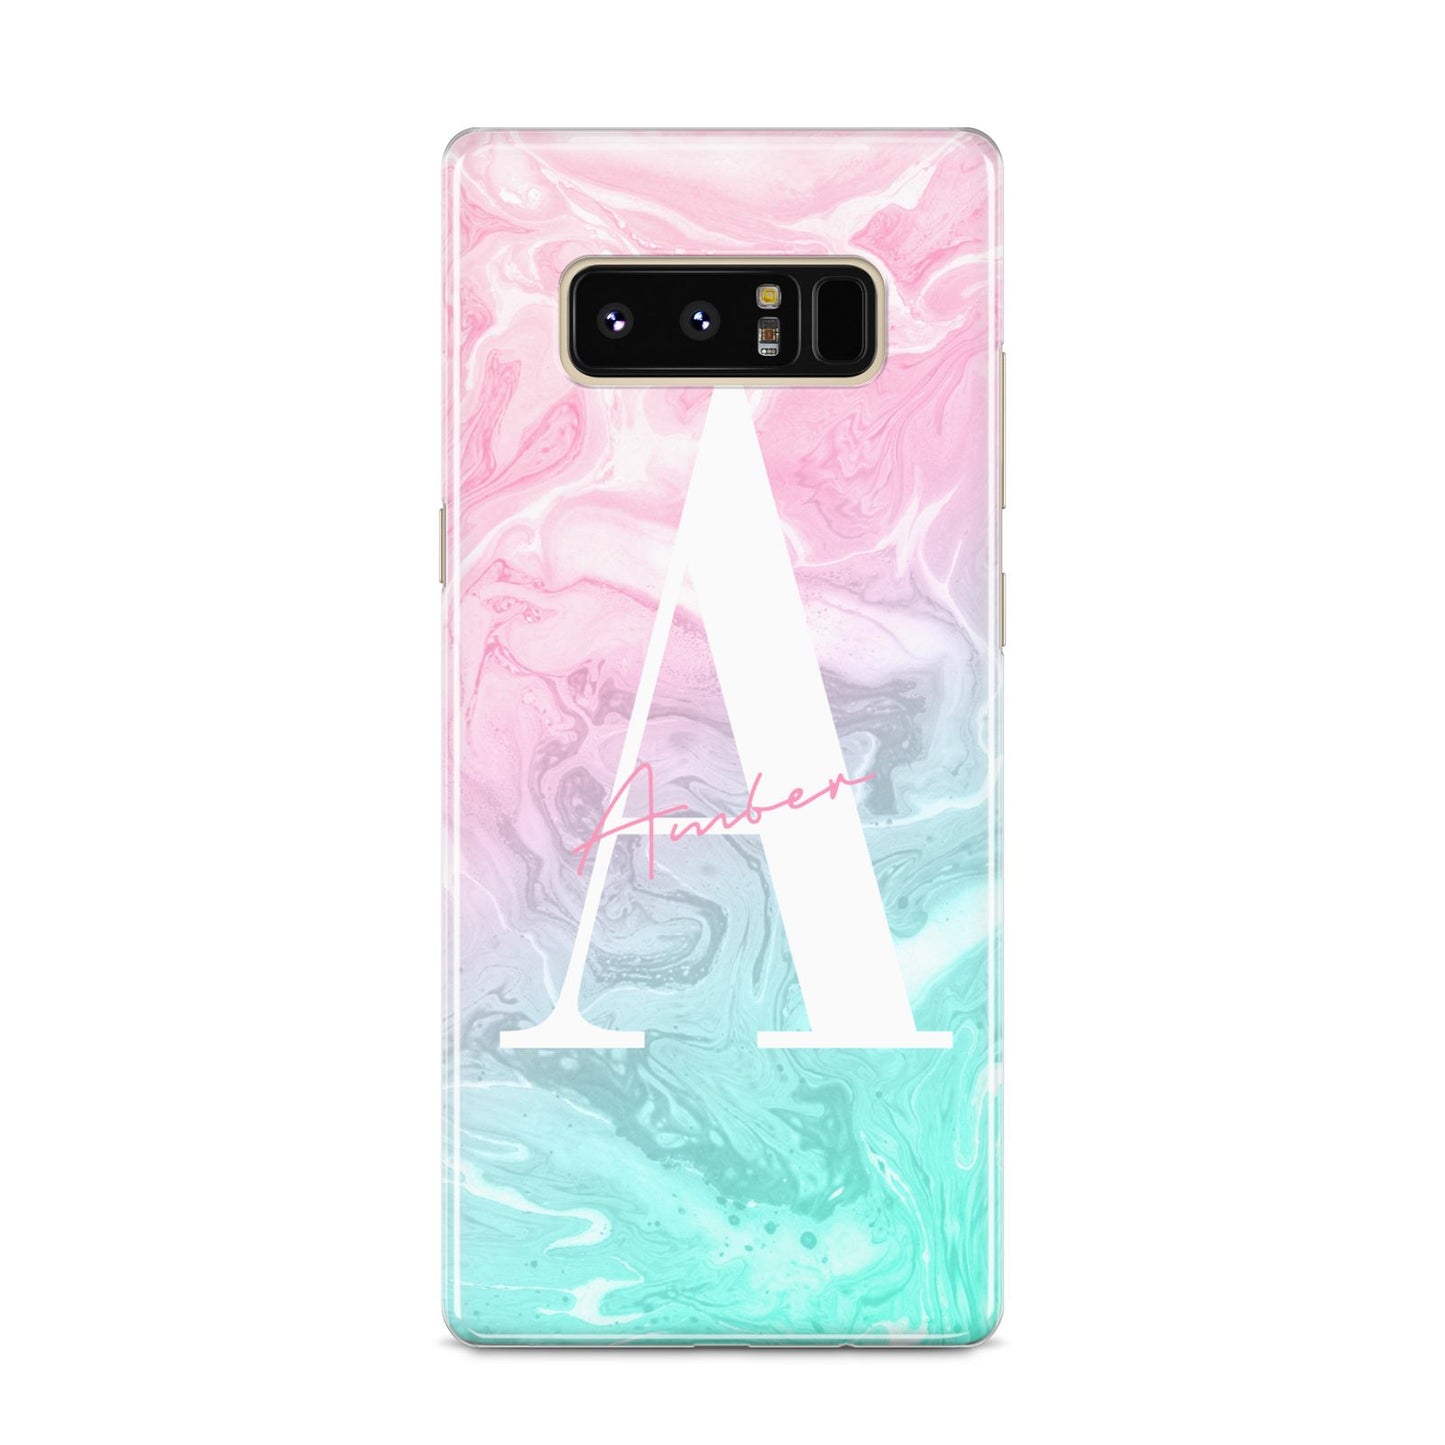 Monogrammed Pink Turquoise Pastel Marble Samsung Galaxy S8 Case